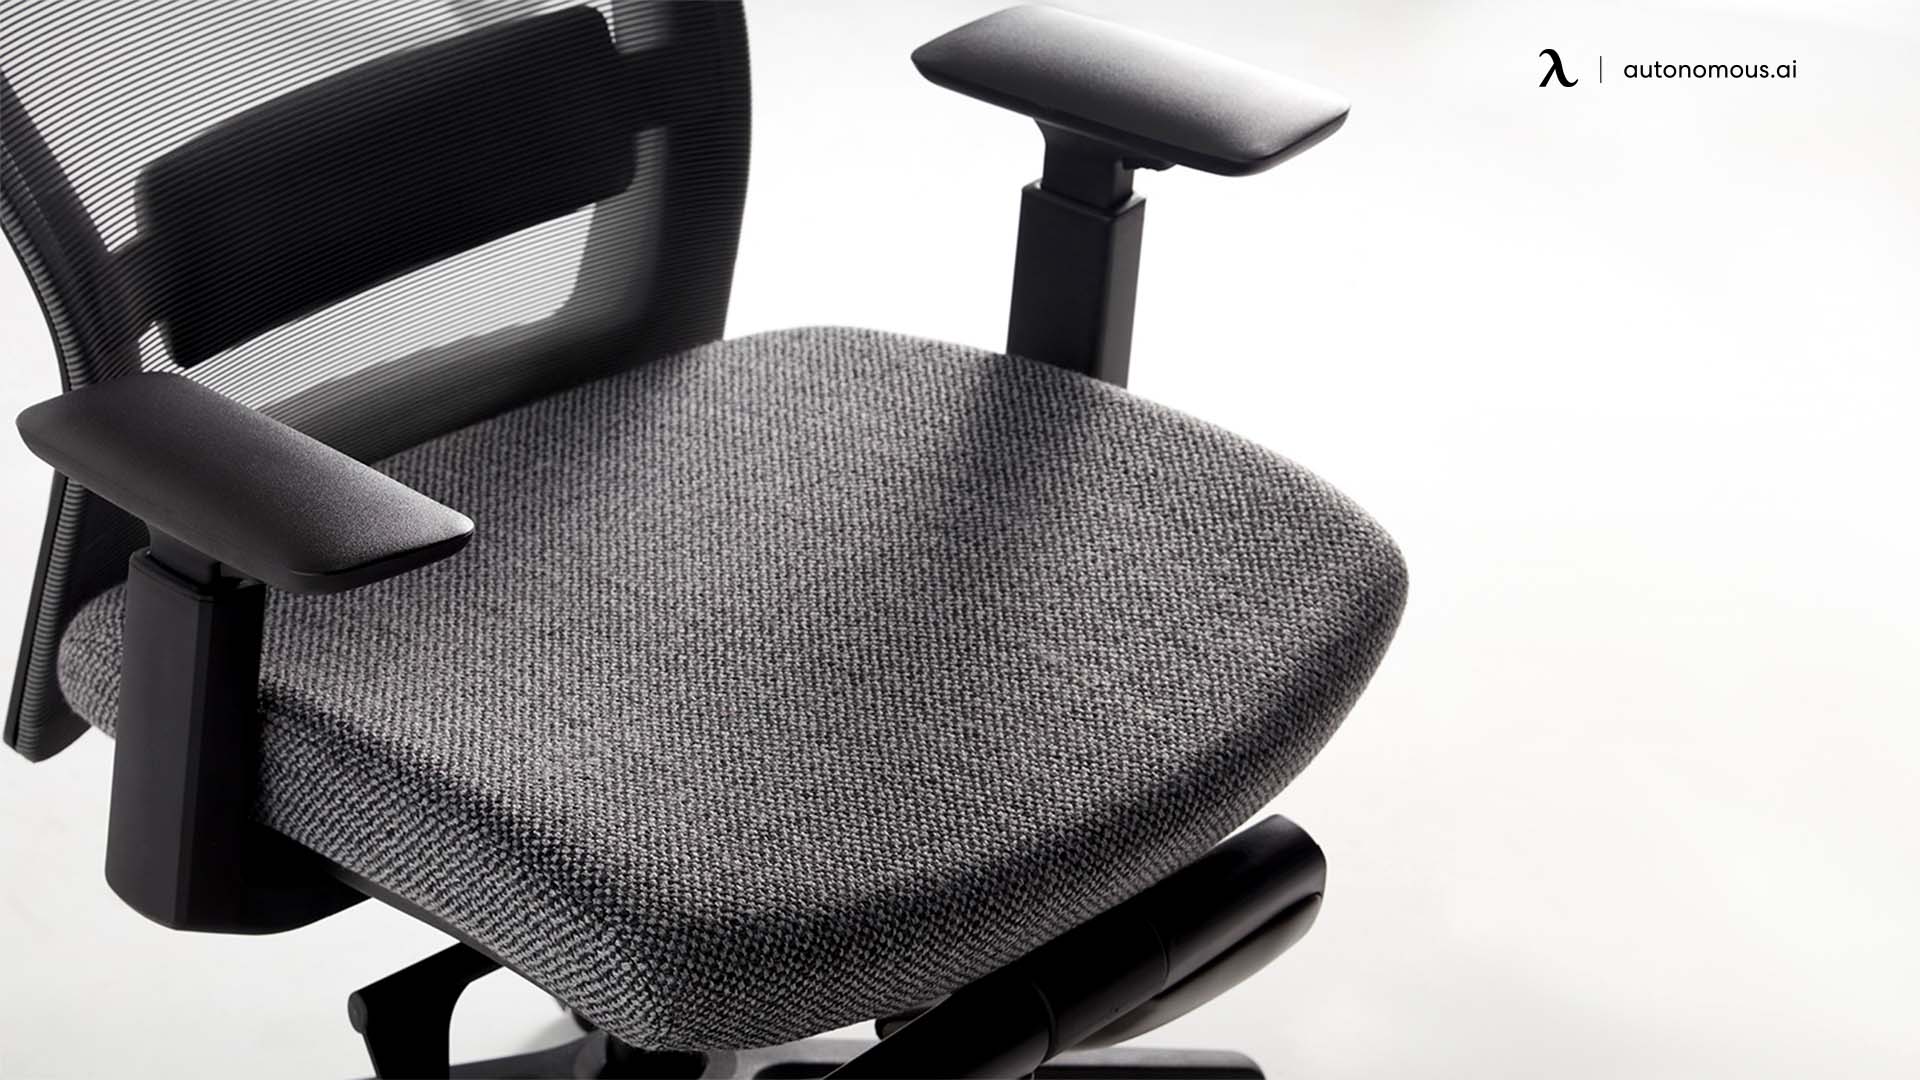 The Seat of heavy duty computer chair